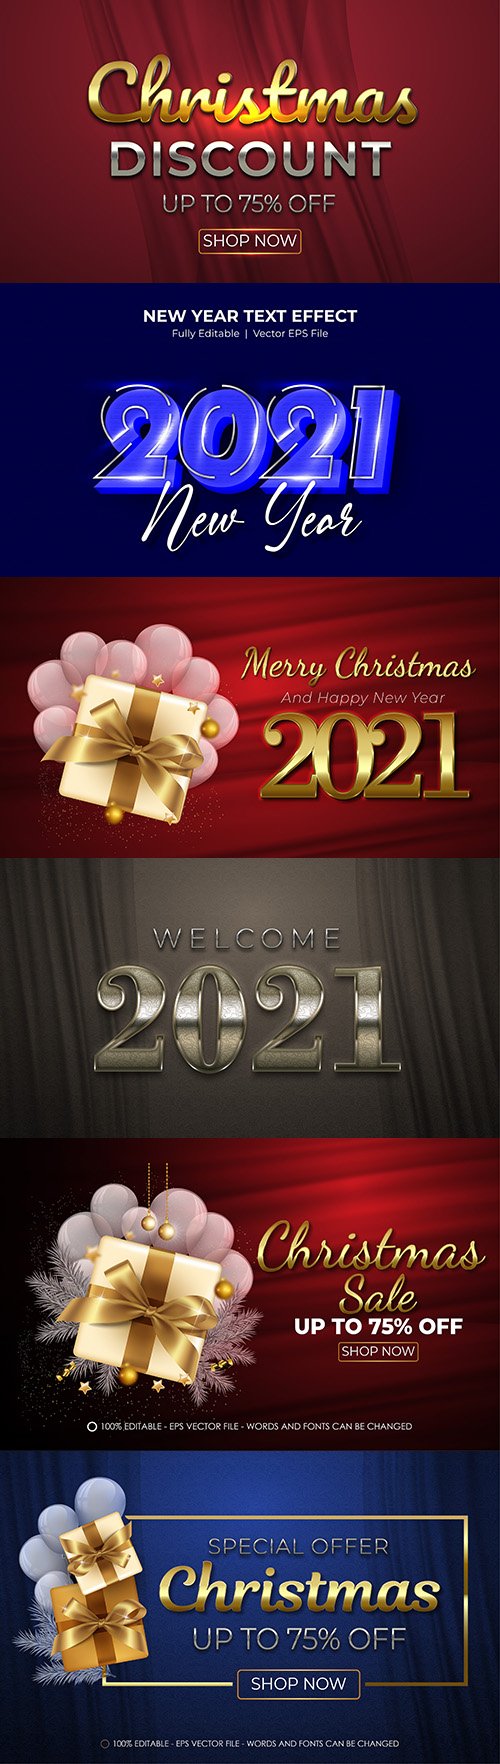 Christmas Editable font effect text collection illustration design